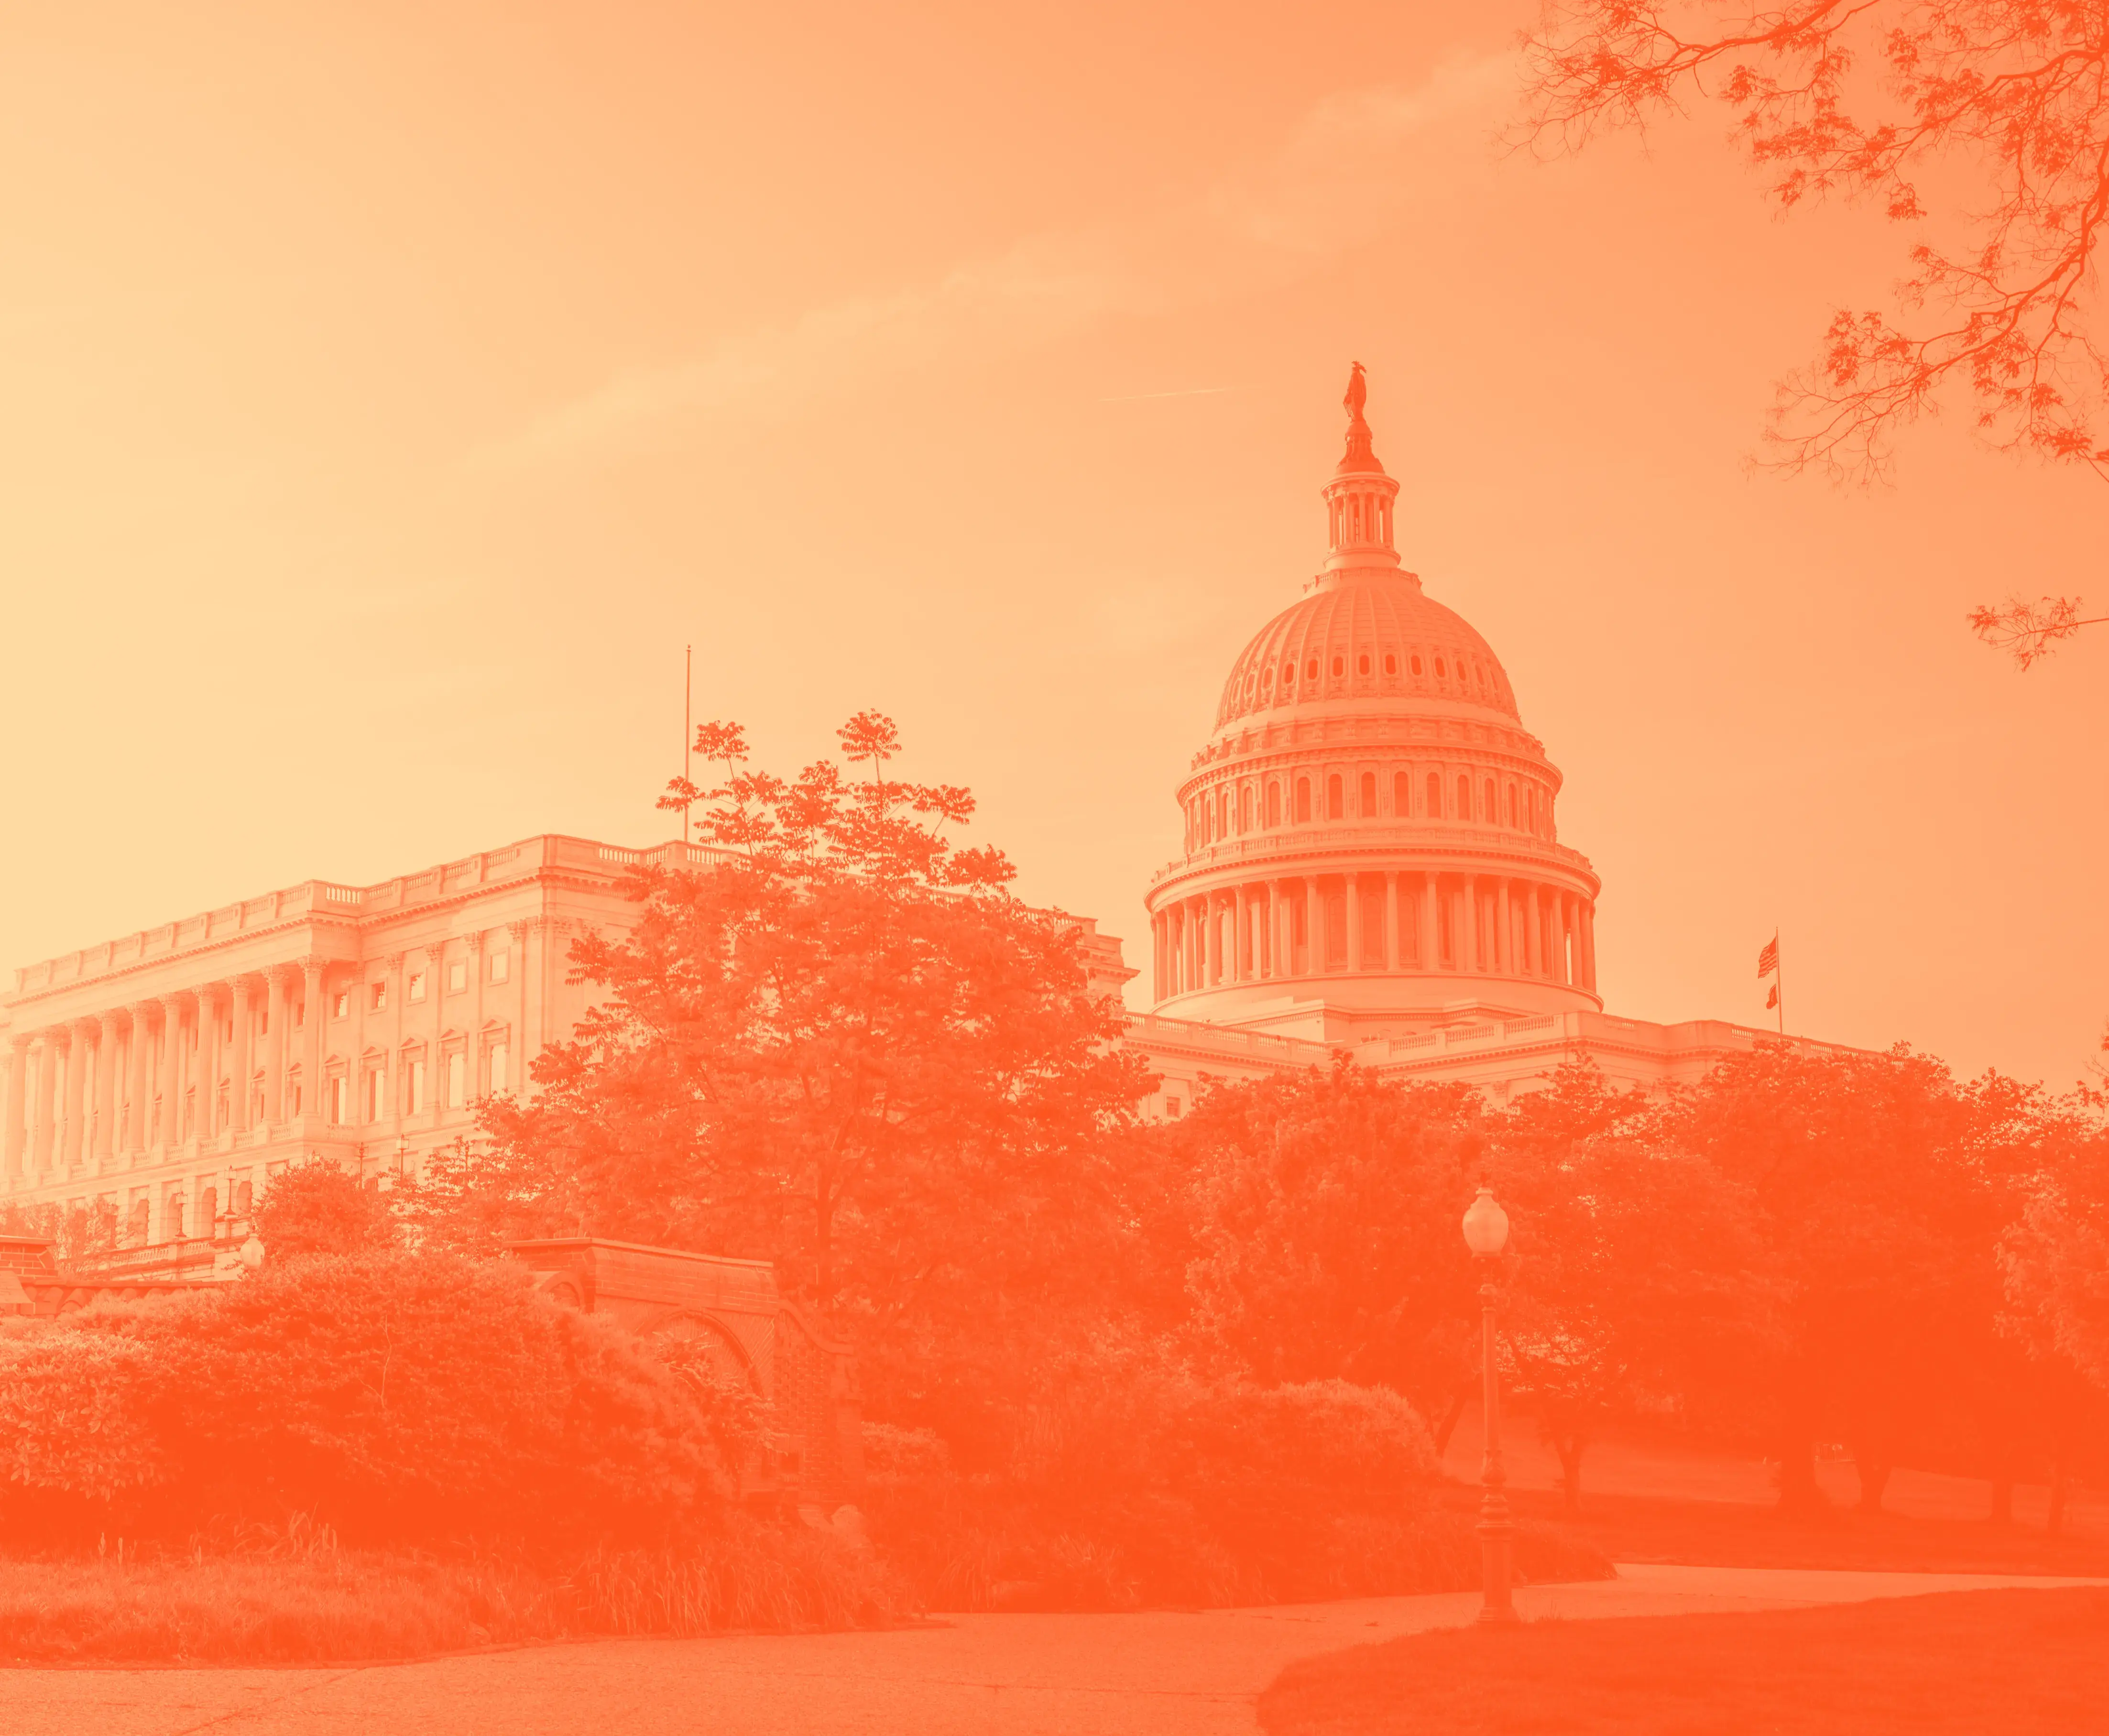 The U.S. Capitol Building with an orange hue.